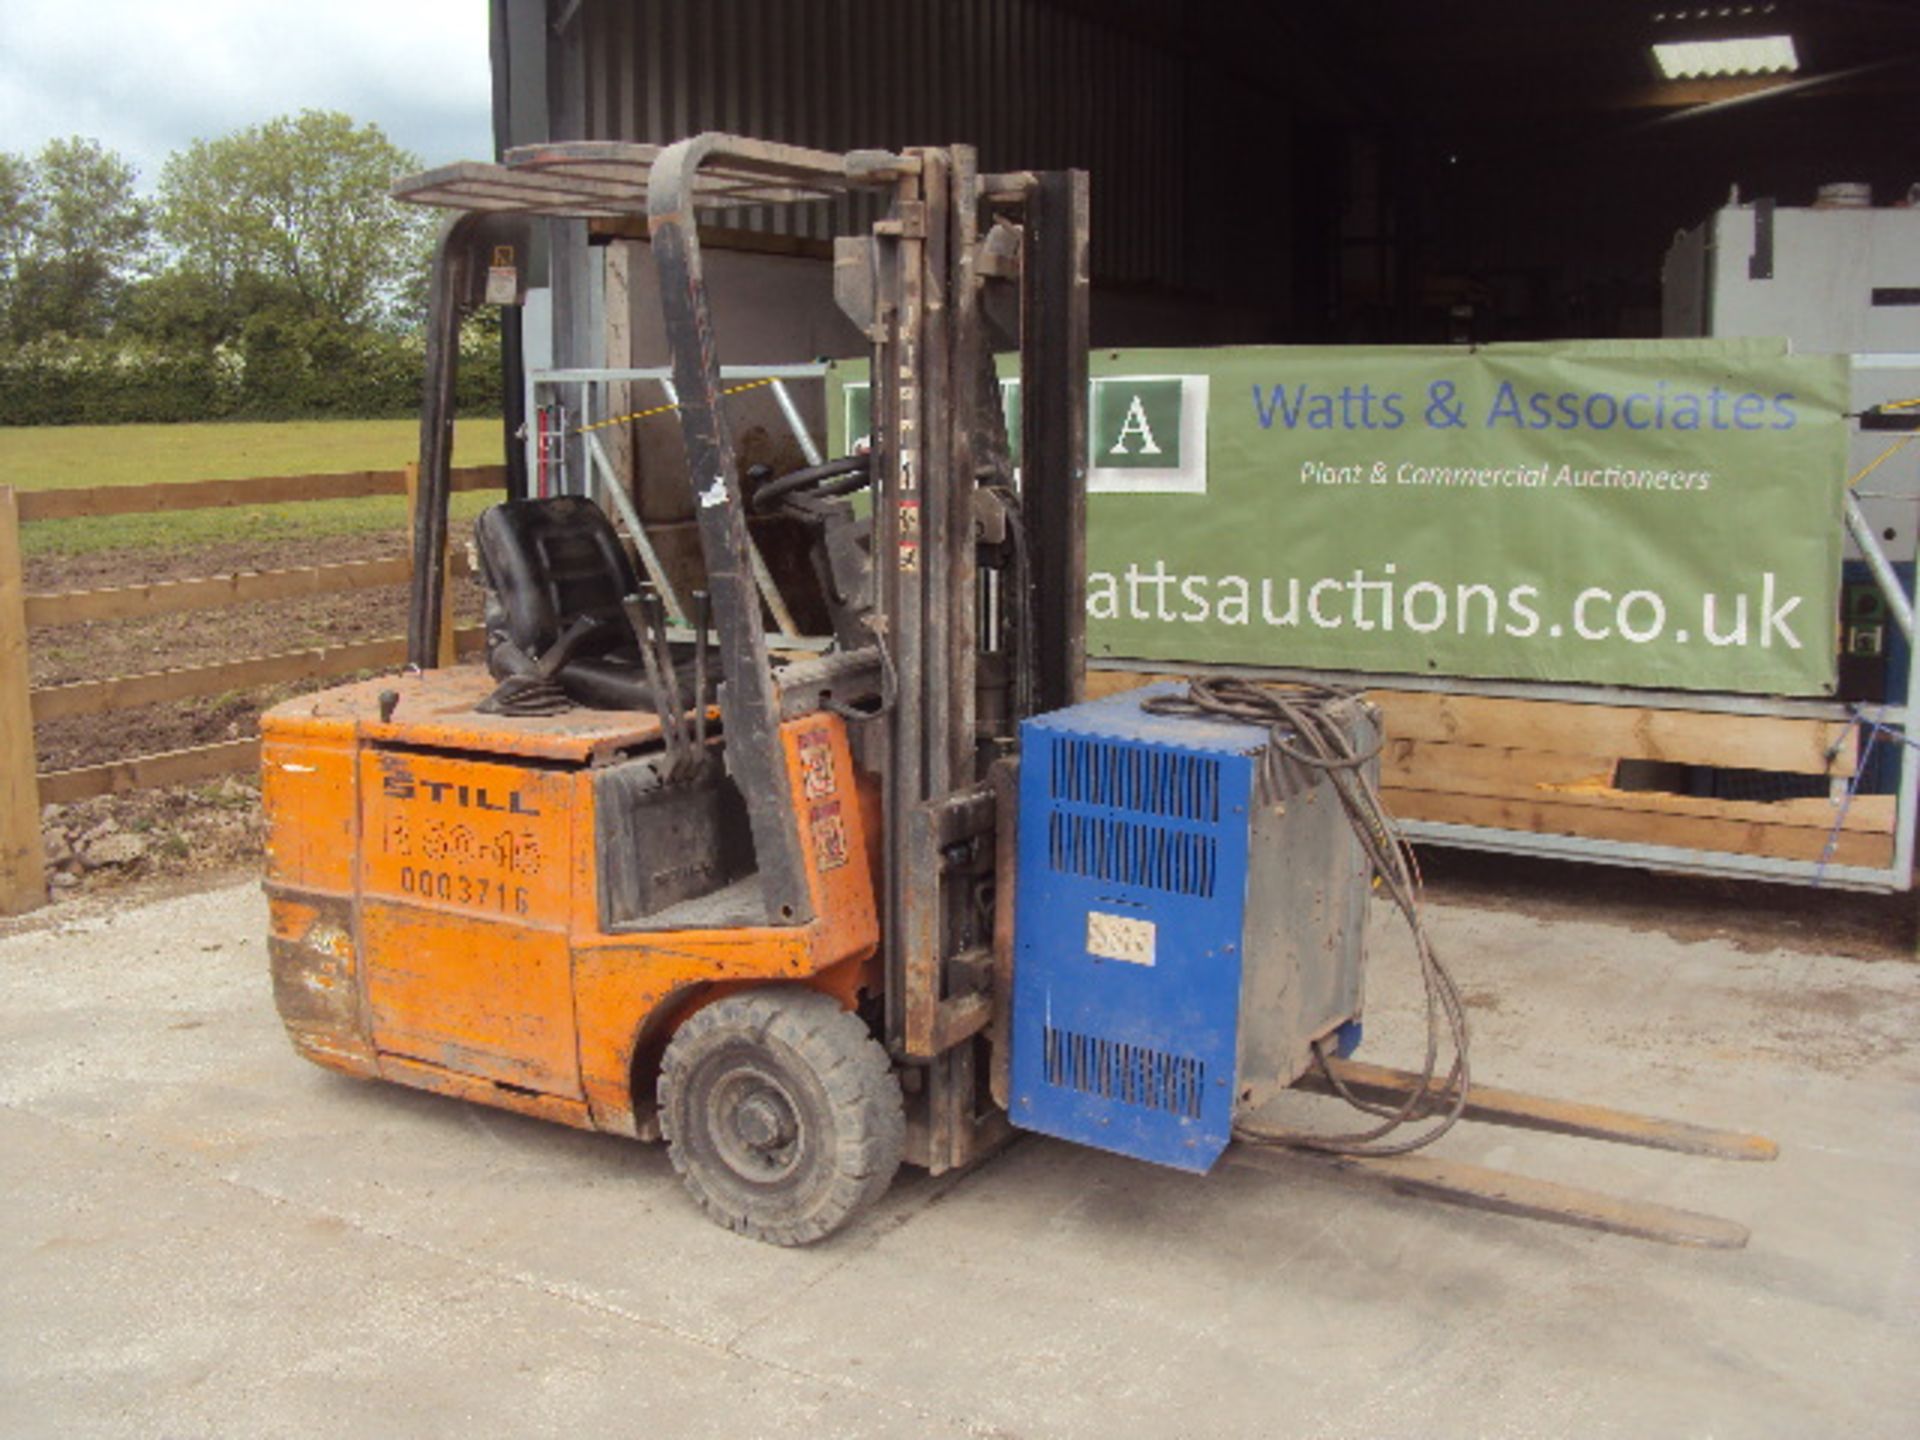 STILL R50-15 1.5t battery driven forklift truck S/n: 0003716 with duplex free-lift mast, charger &